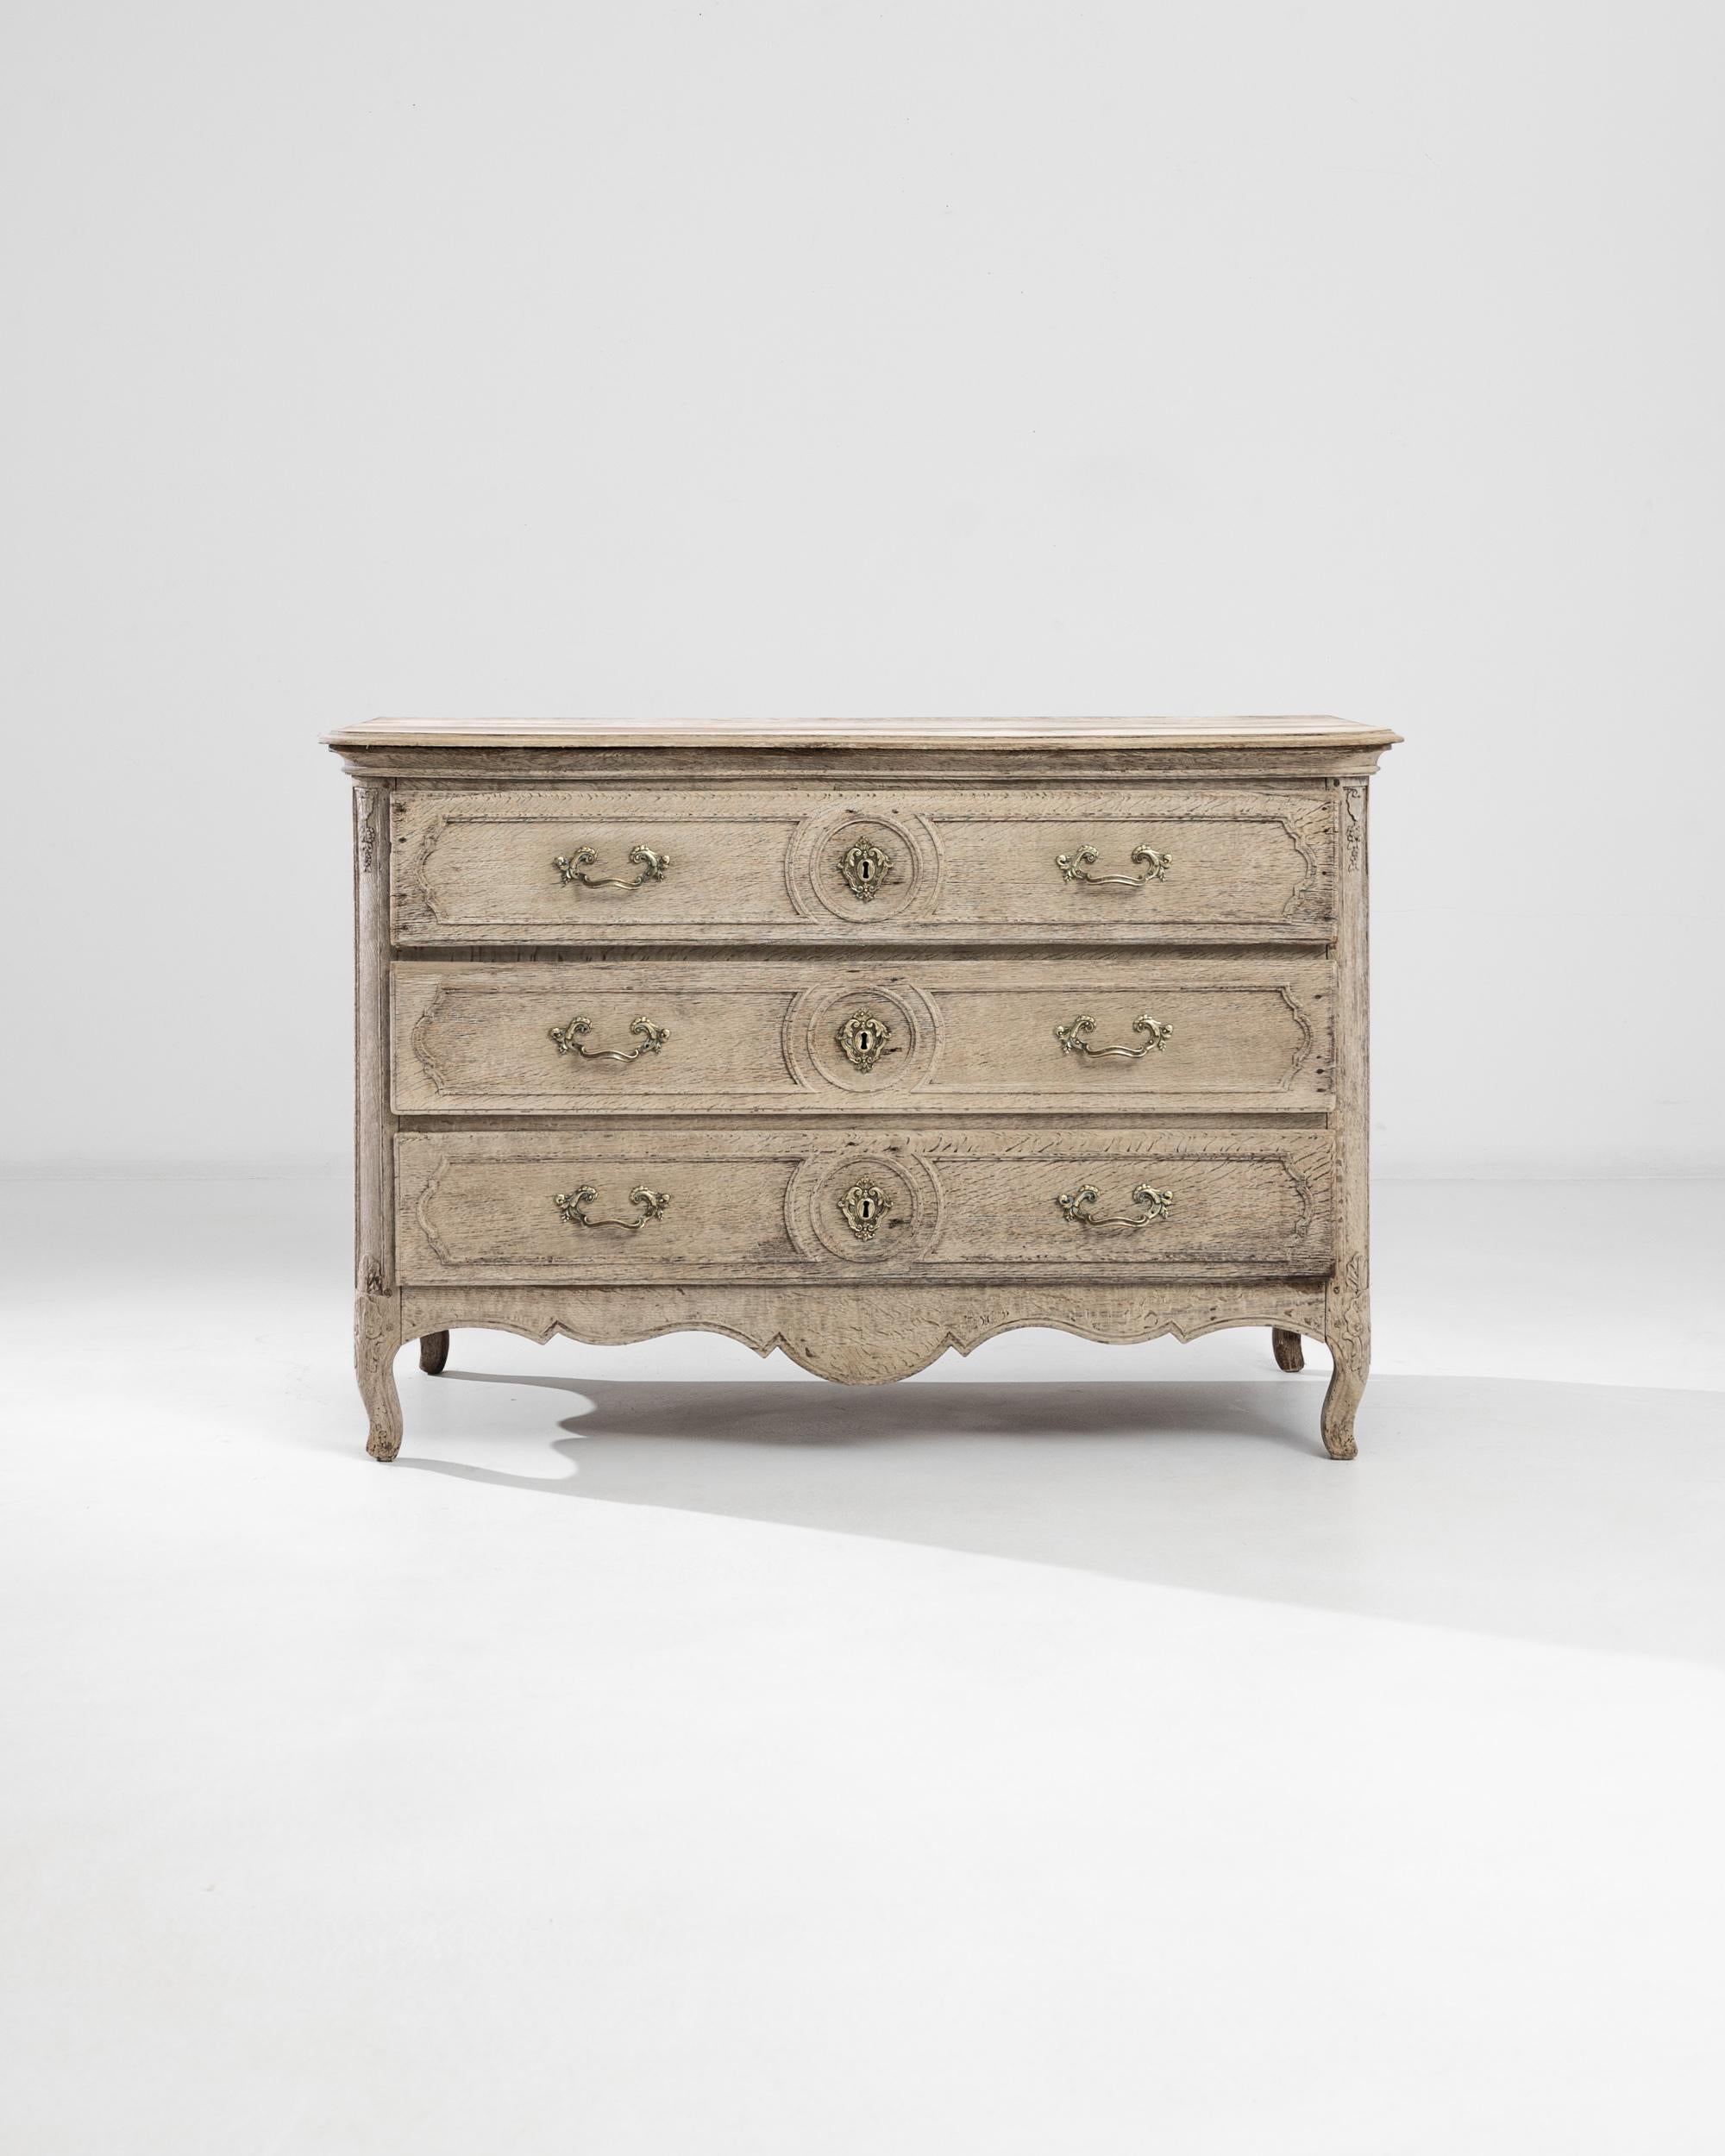 A bleached oak three-drawer dresser crafted in France in the 19th century. From the cabriole legs and scalloped skirt to the panel carvings and molded top, this antique chest of drawers flaunts a dainty neoclassical silhouette embellished by the